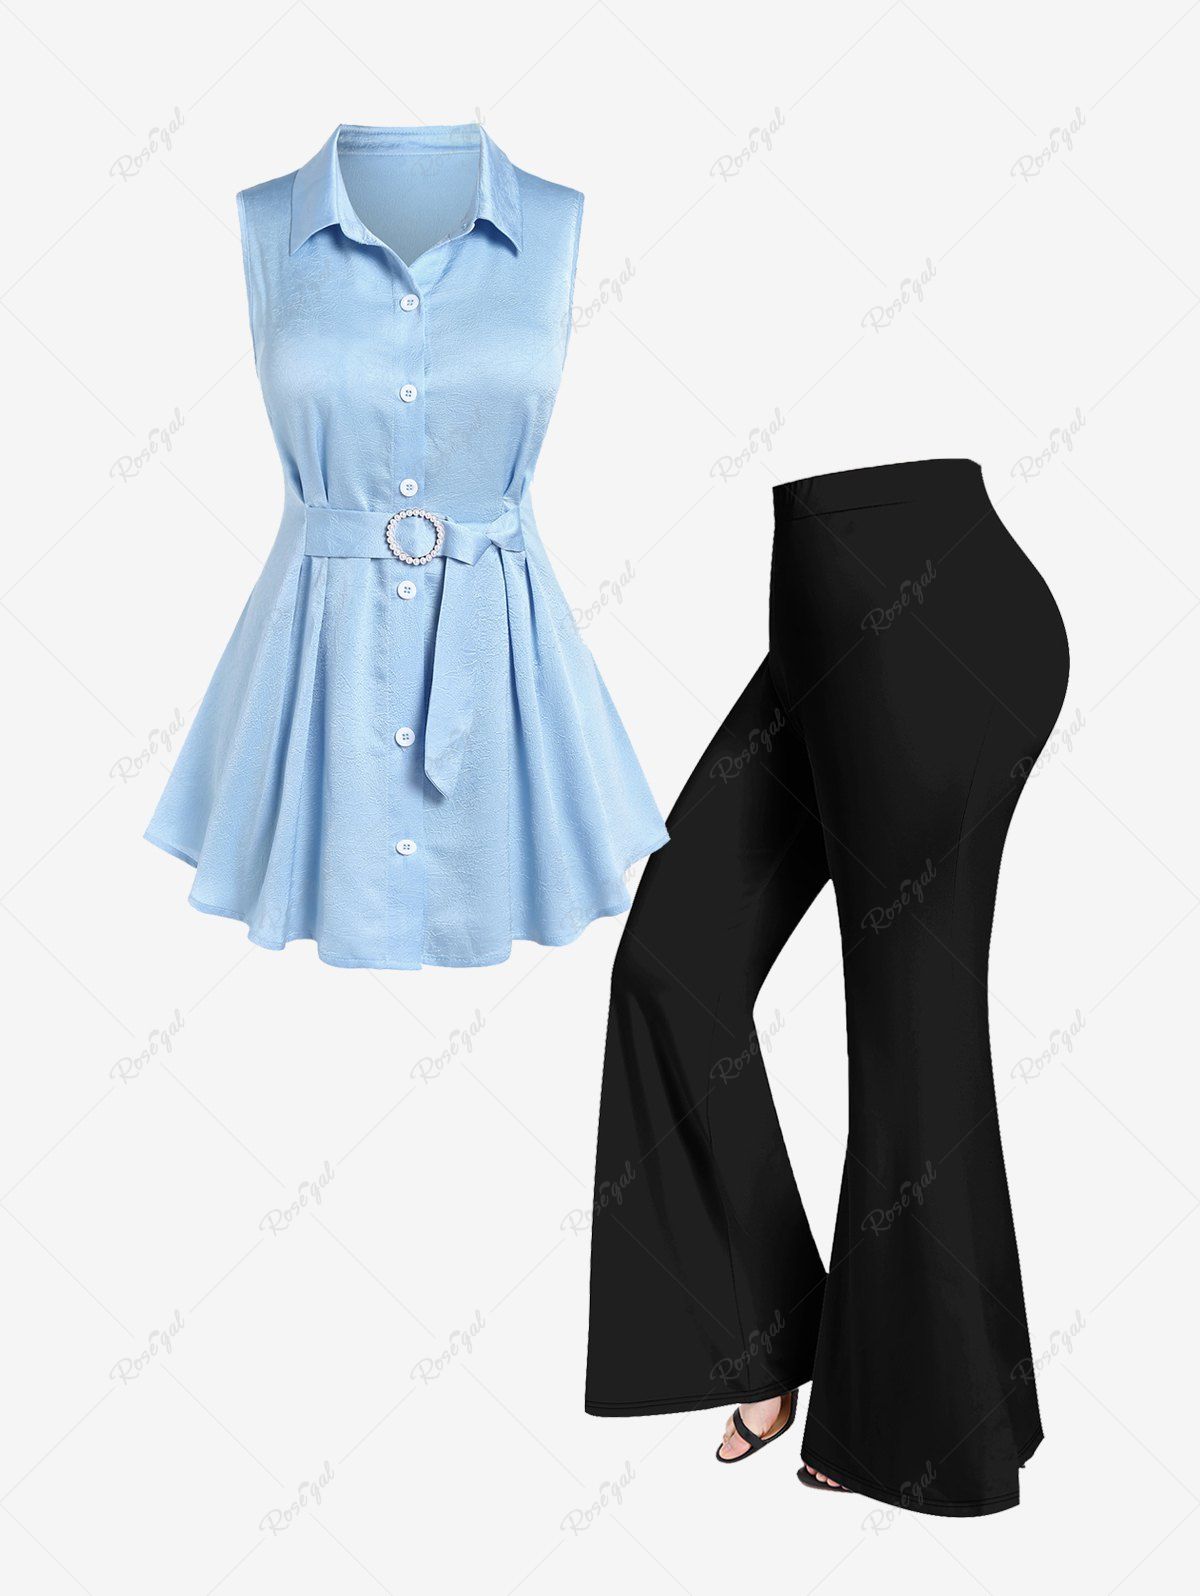 Unique Sleeveless Buttons Buckle Belt Shirt and Flare Pants Plus Size Summer Outfit  